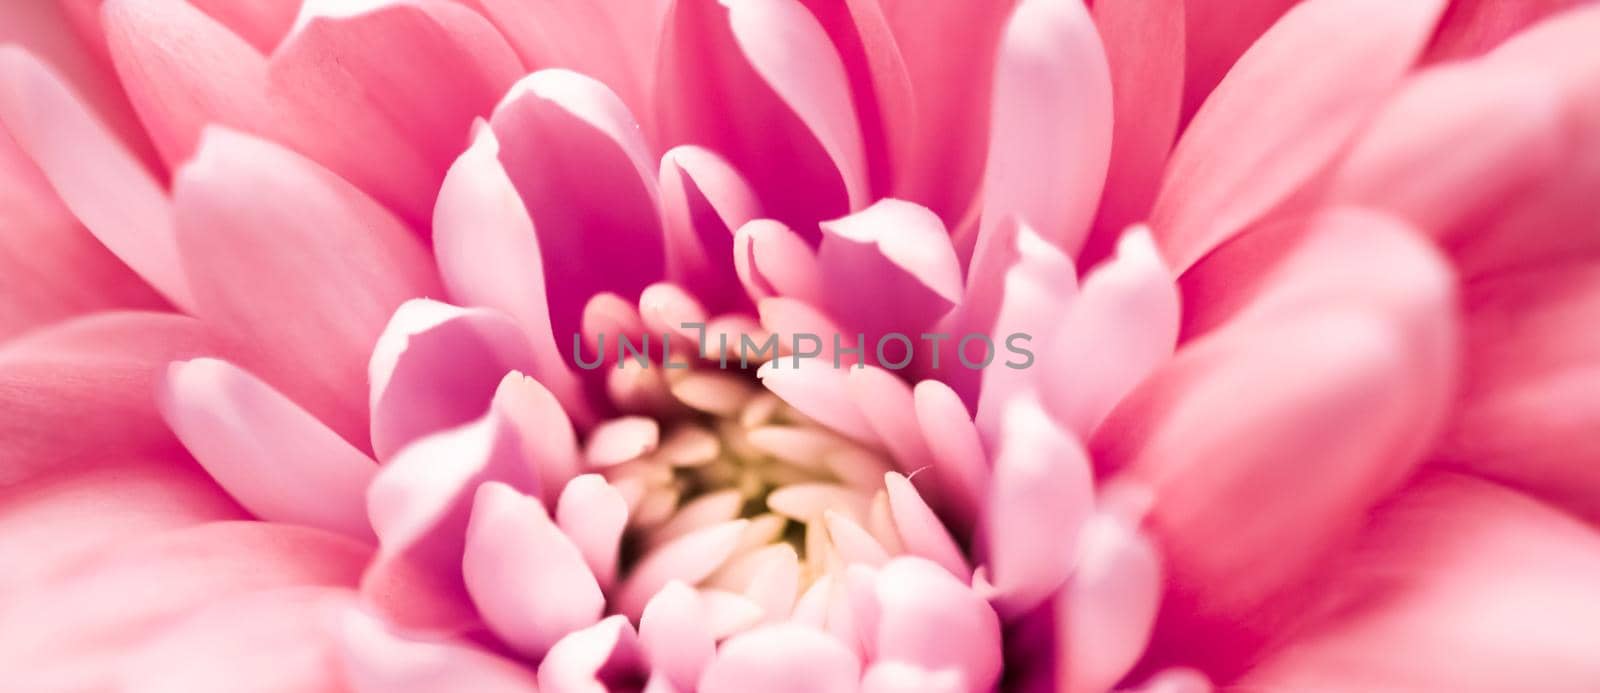 Flora, branding and love concept - Coral daisy flower petals in bloom, abstract floral blossom art background, flowers in spring nature for perfume scent, wedding, luxury beauty brand holiday design